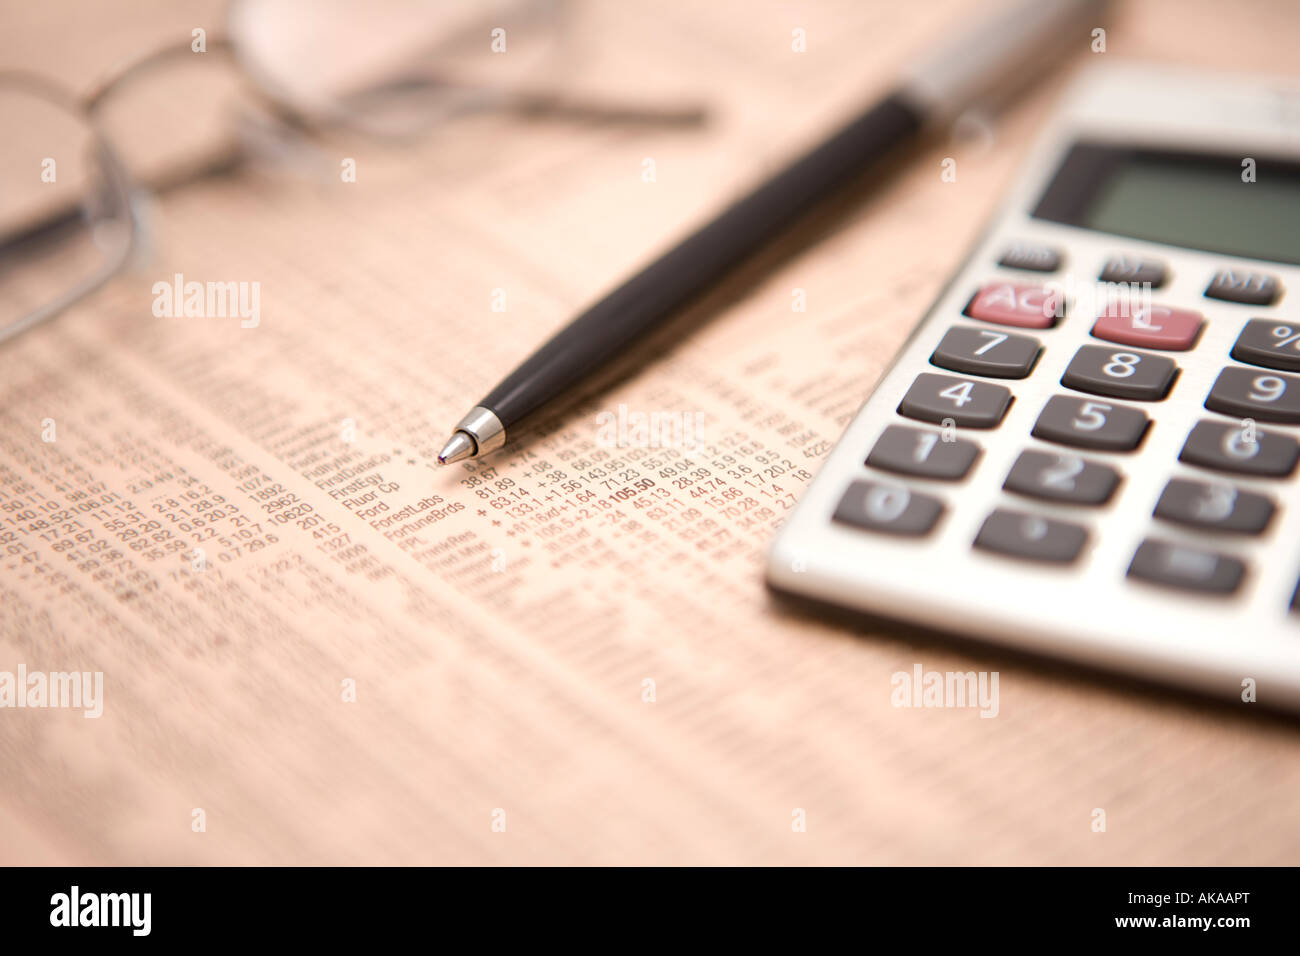 Financial newspaper calculating studying stocks and shares and financial markers for possible winners and losers Stock Photo